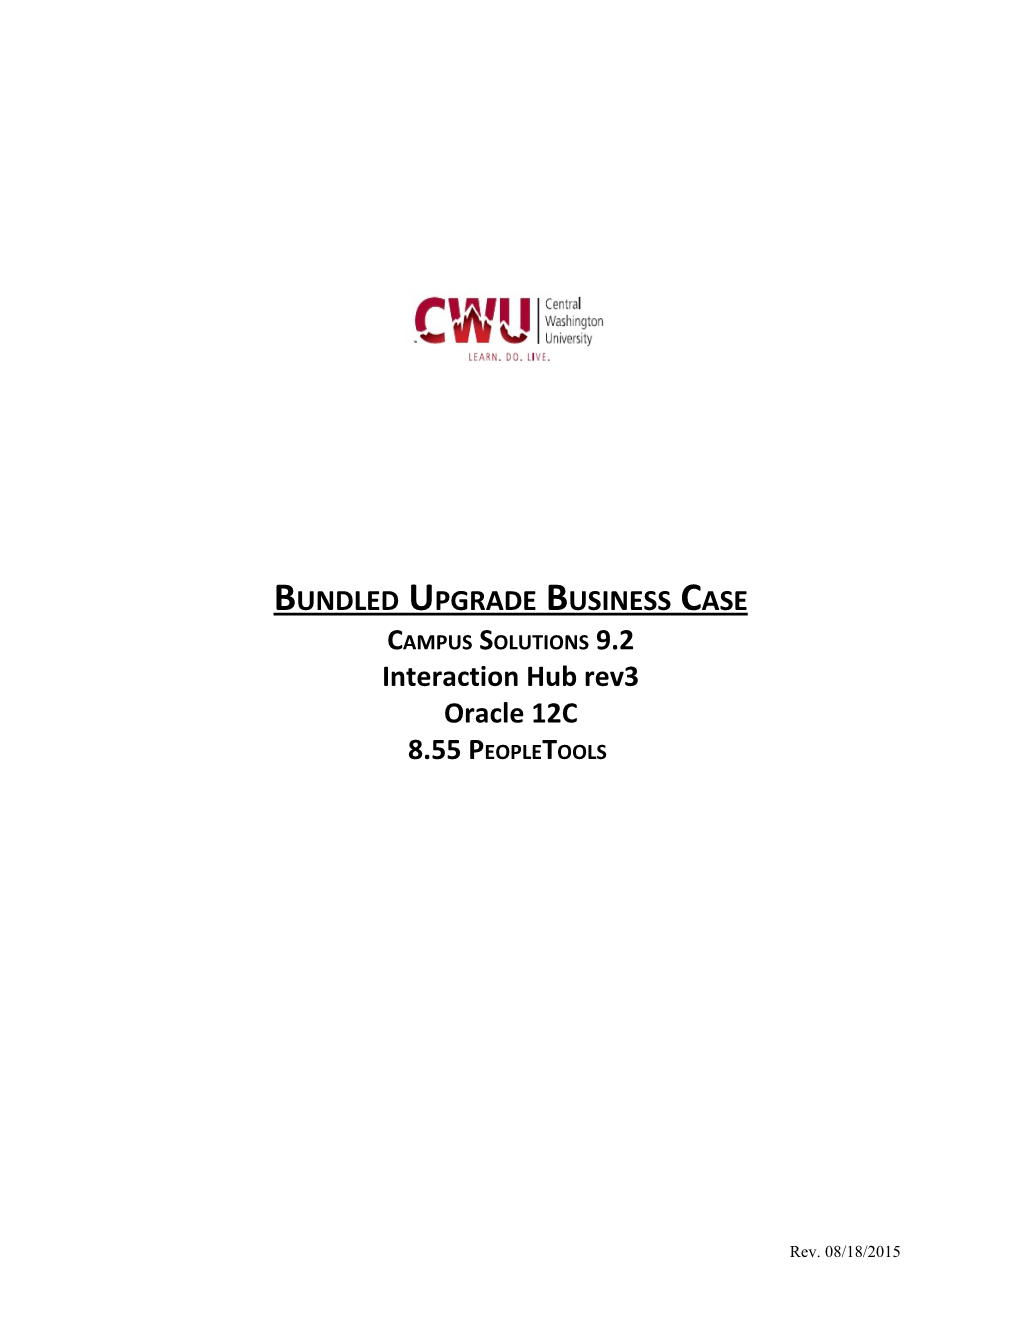 Bundled Upgrade Business Case Campus Solutions 9.2 Interaction Hub Rev3 Oracle 12C 8.55